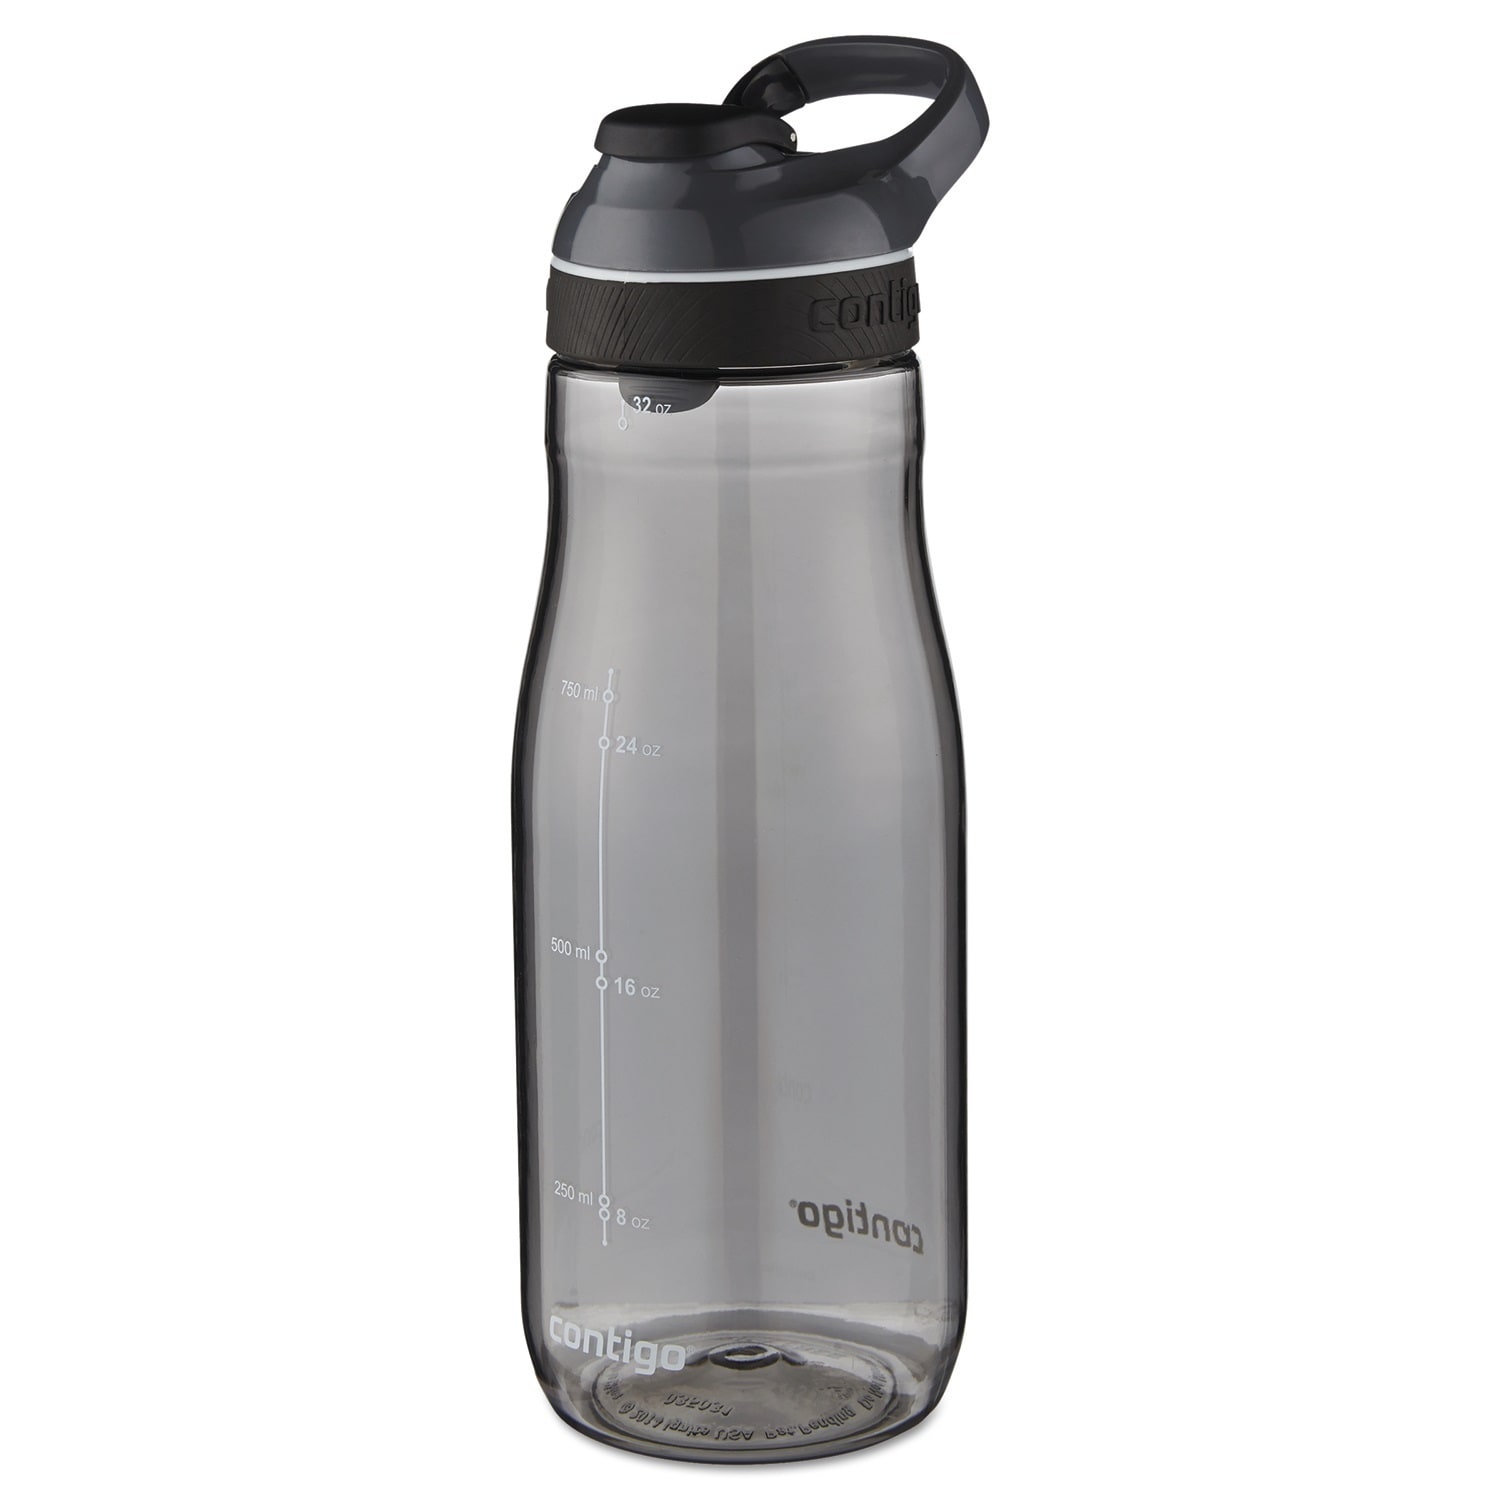 Contigo Cortland Spill-Proof Water Bottle, BPA-Free Plastic Water Bottle  with Leak-Proof Lid and Carry Handle, Dishwasher Safe